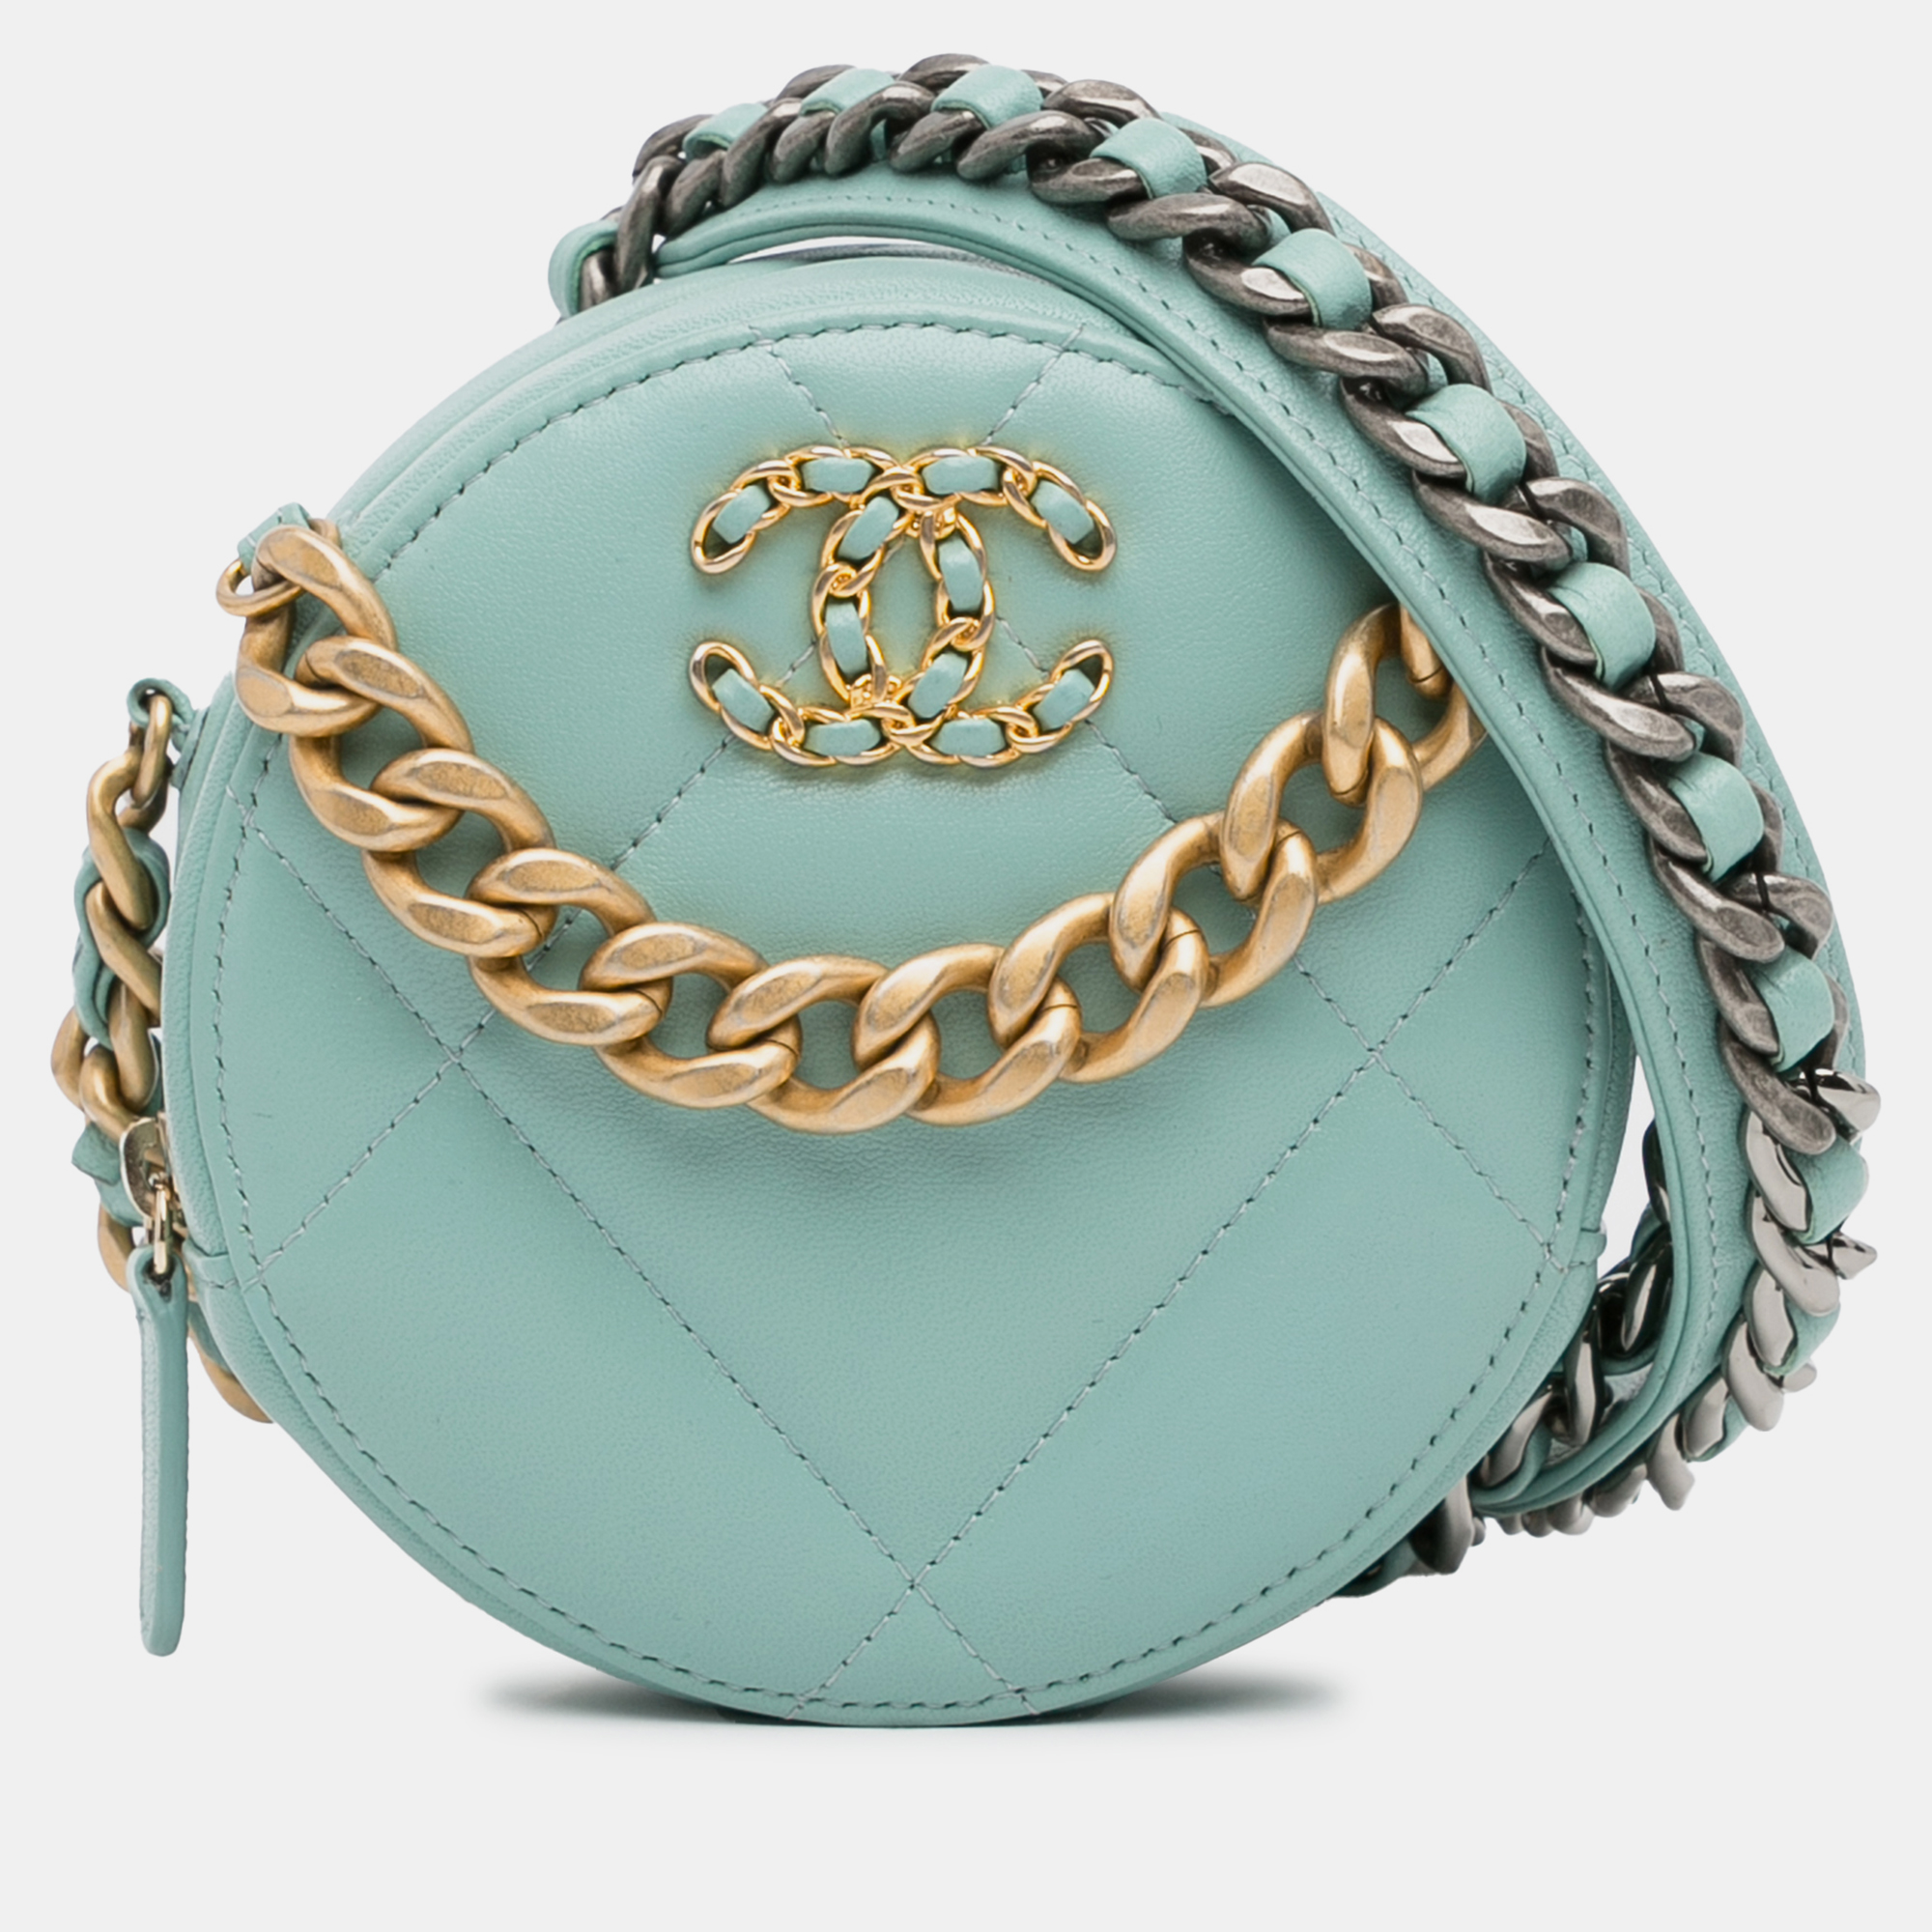 

Chanel Lambskin 19 Round Clutch with Chain, Blue